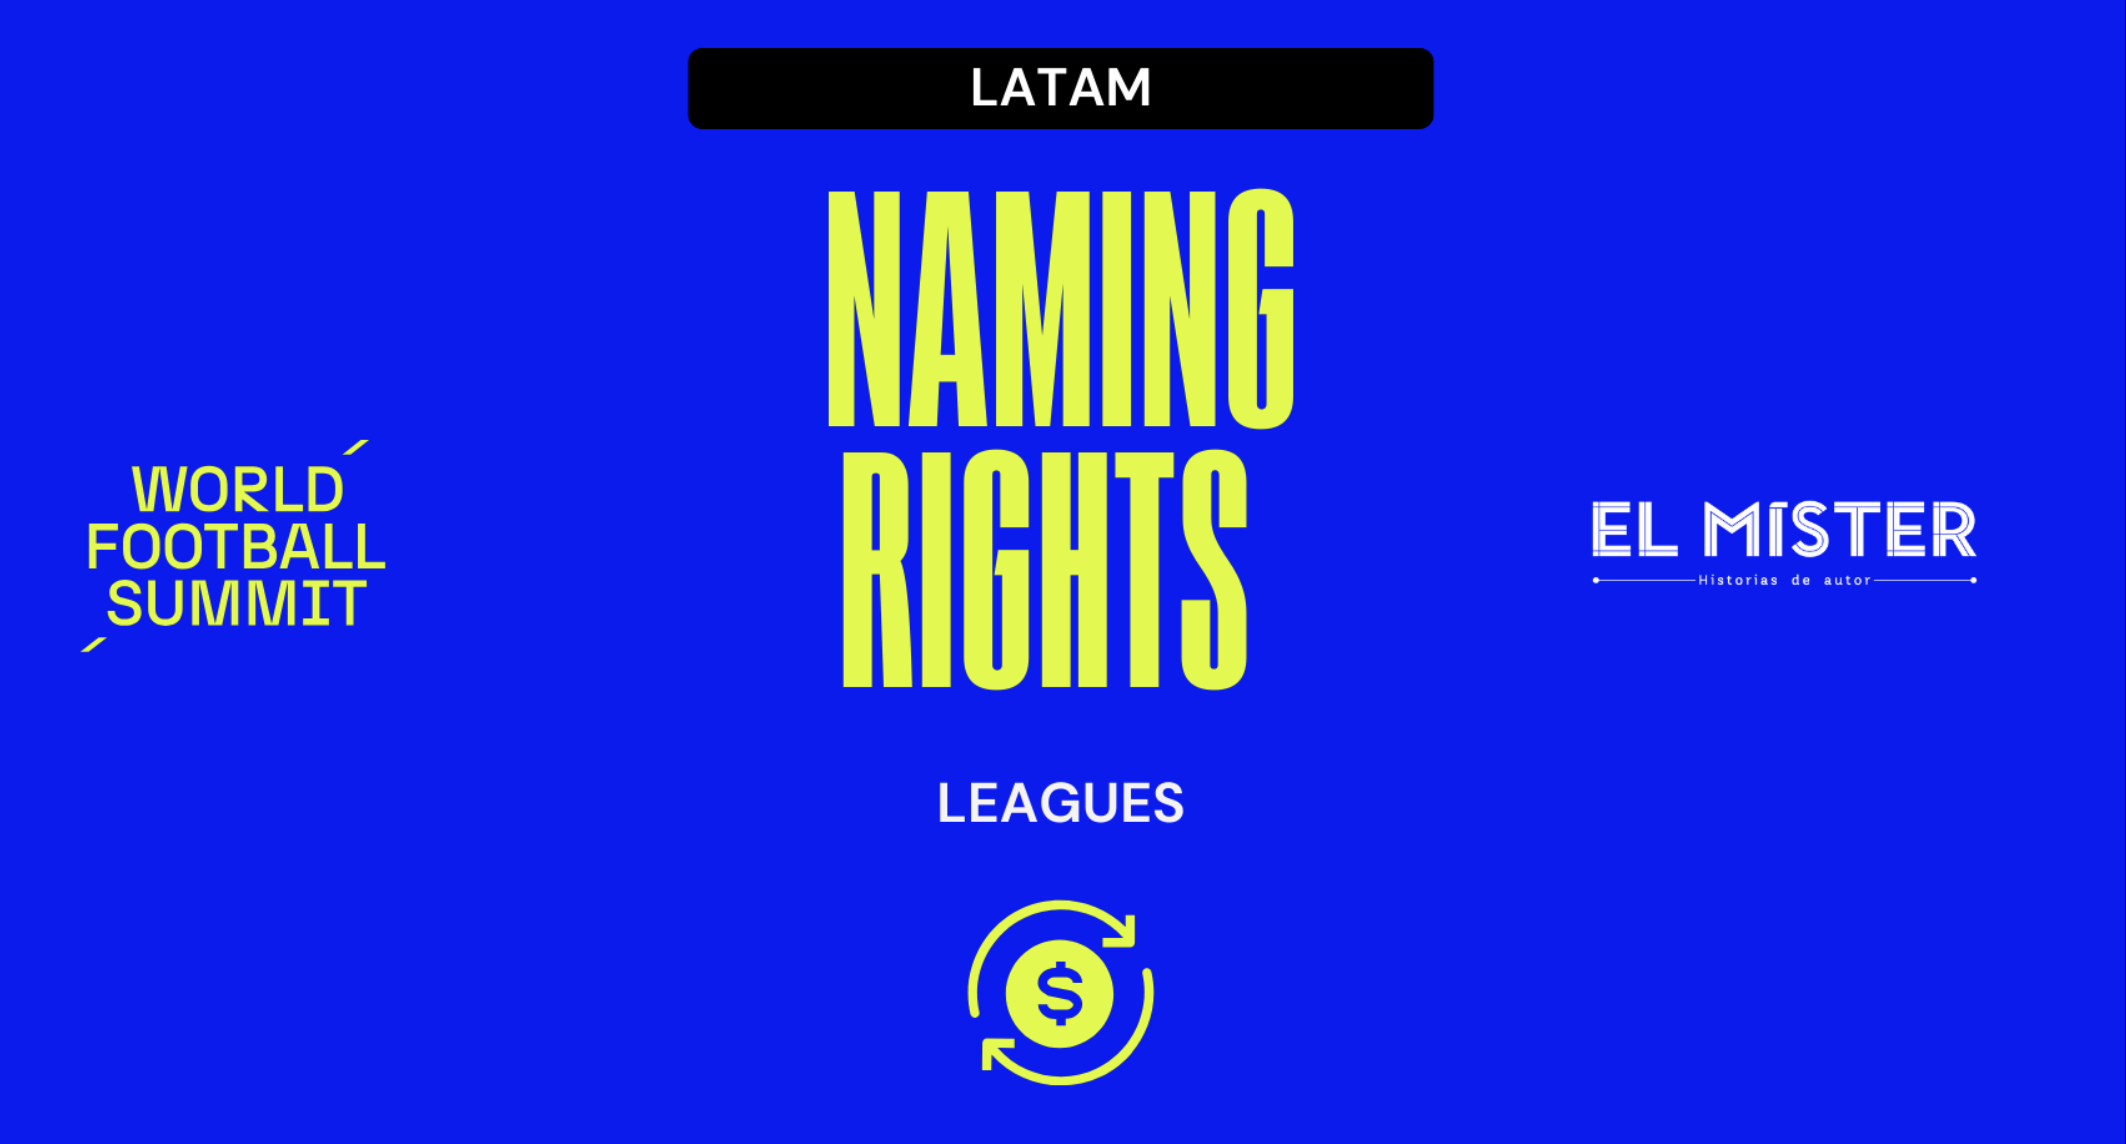 Naming Rights in Latam Report - World Football Summit